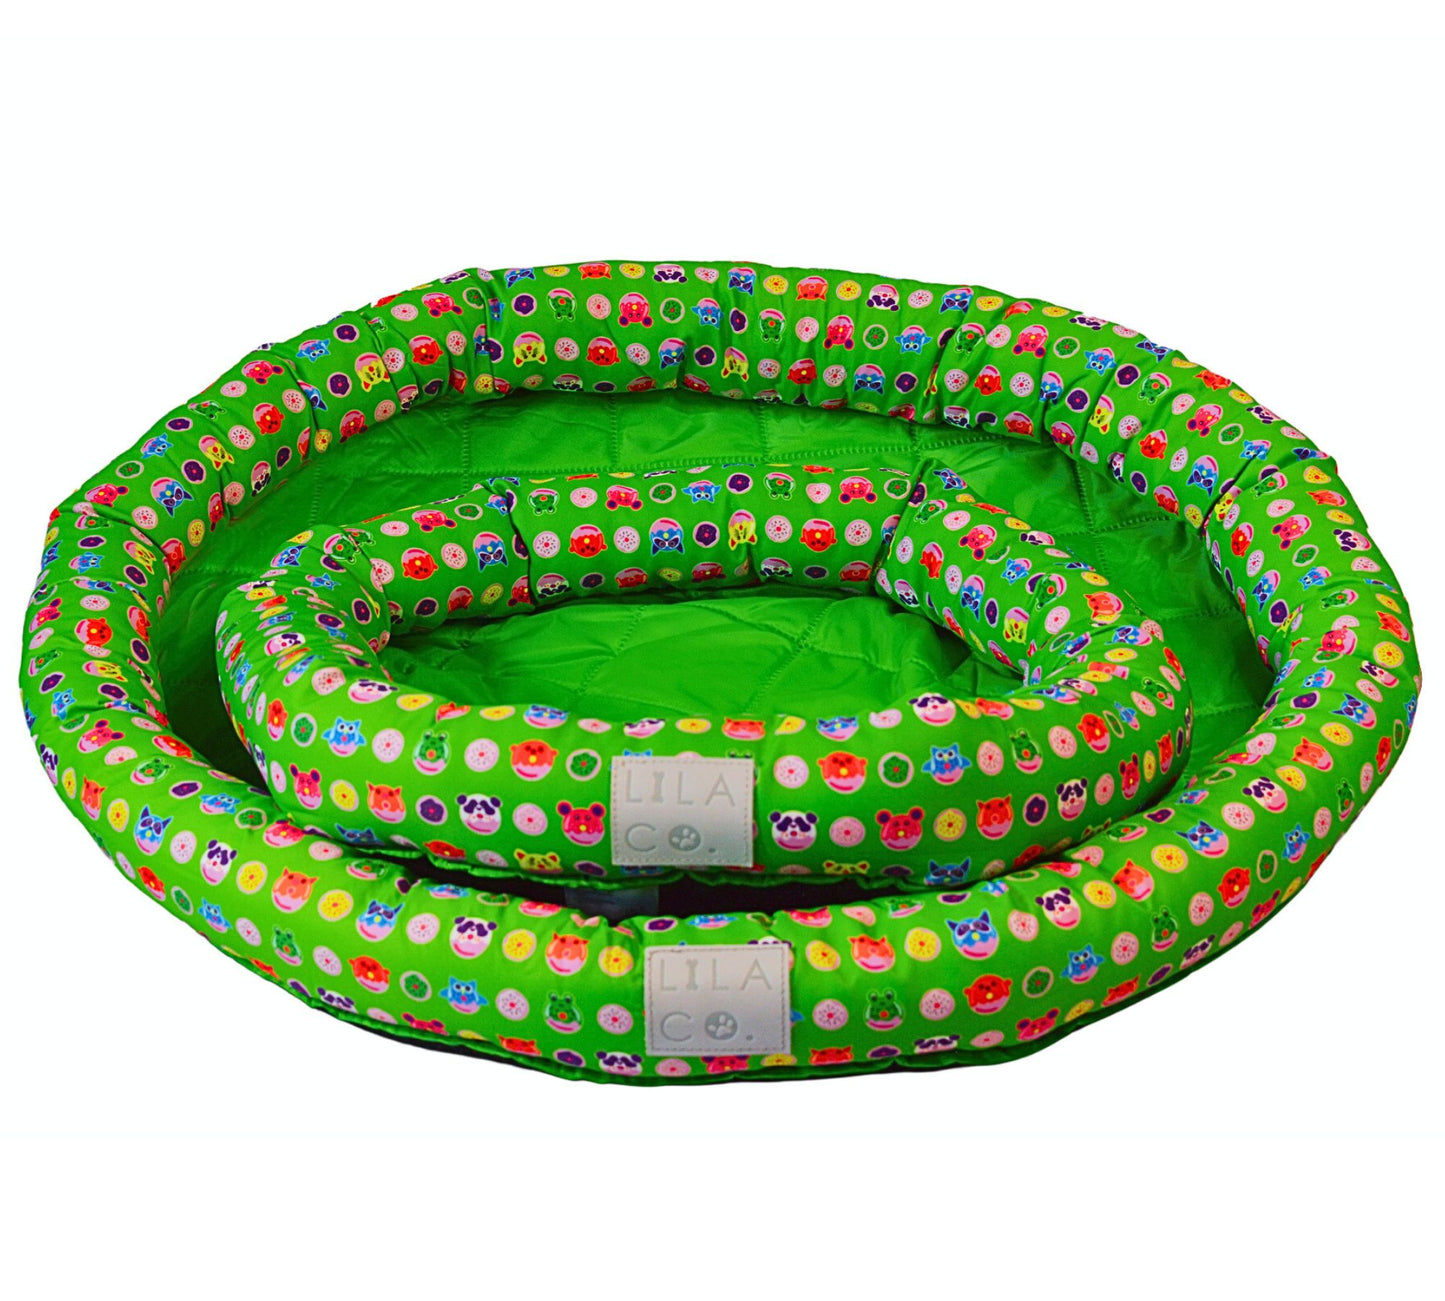 Green Donut Animals Cooling Pet Bed Cooling Dog Bed Outdoor Dog Bed Outdoor Pet Bed  Australia Pet Supplies Australia Dog Accessories Pet Accessories 